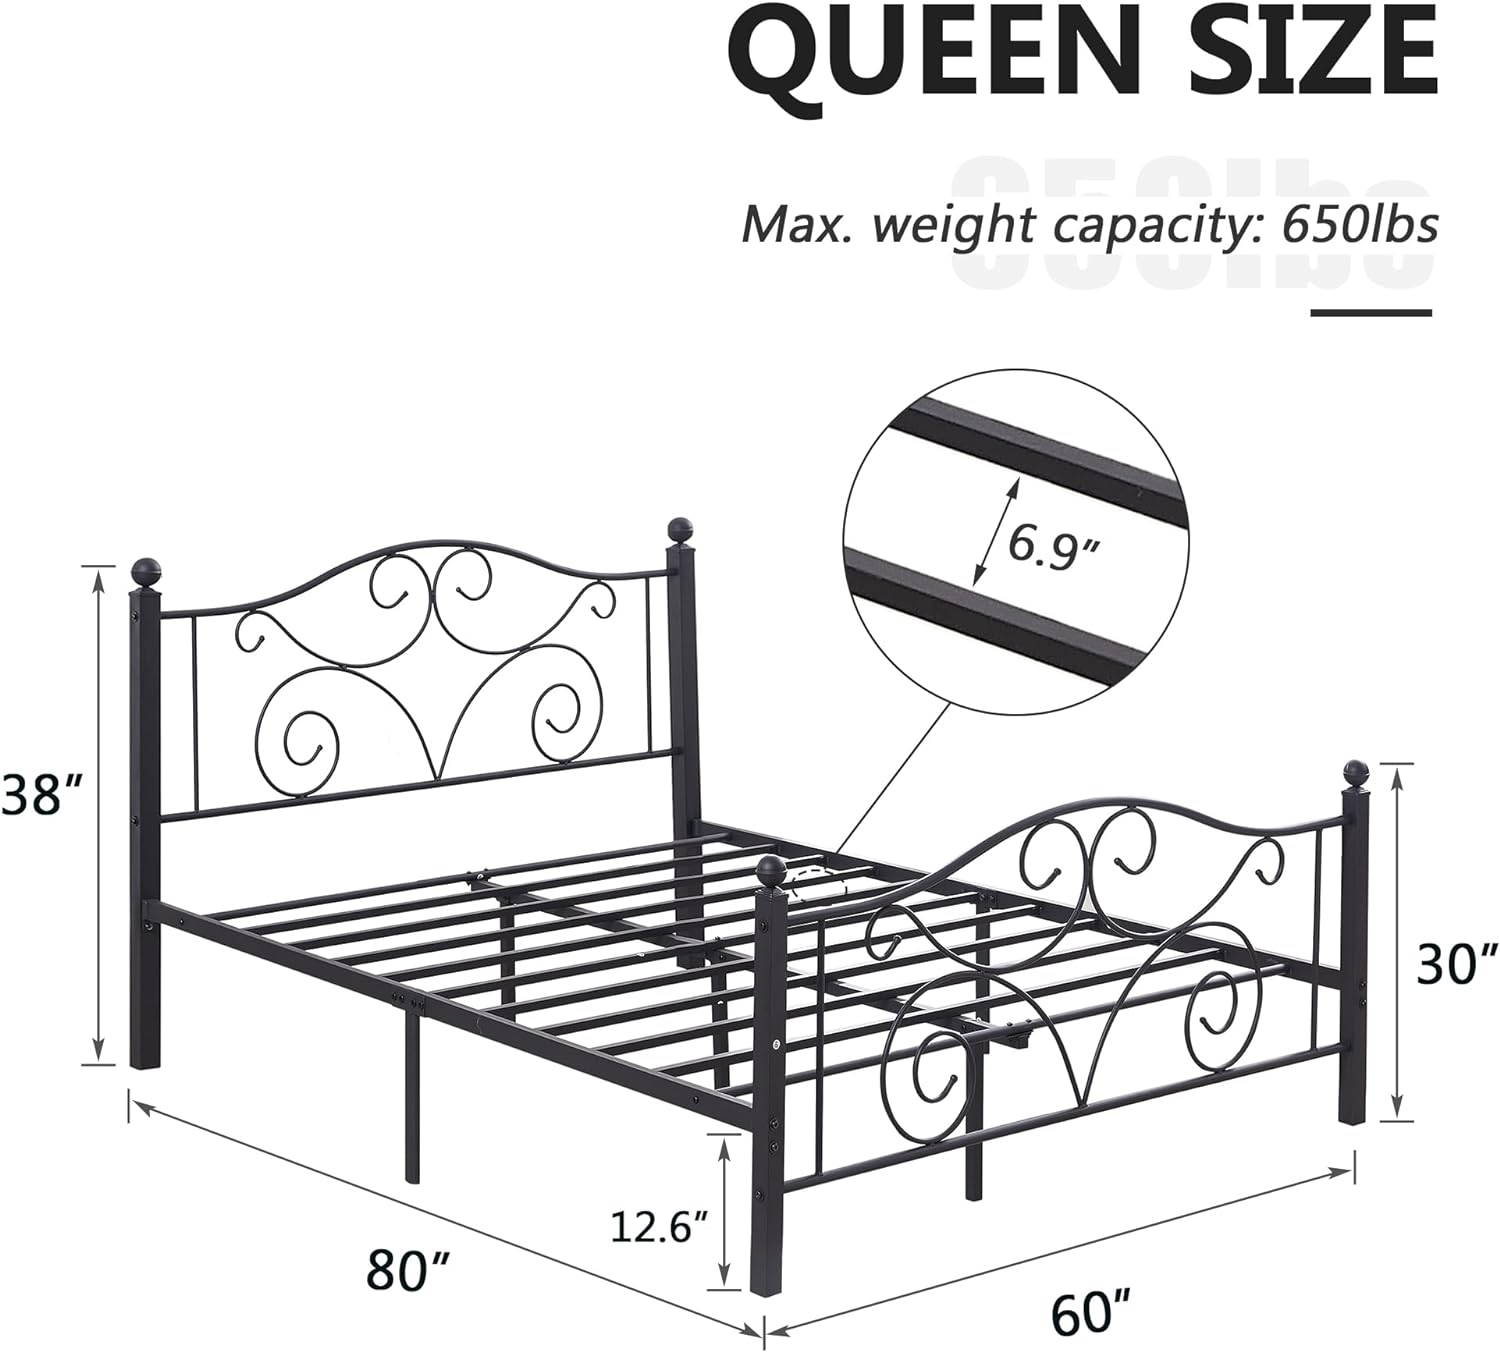 VECELO Classic Metal Bed Frame Mattress Foundation